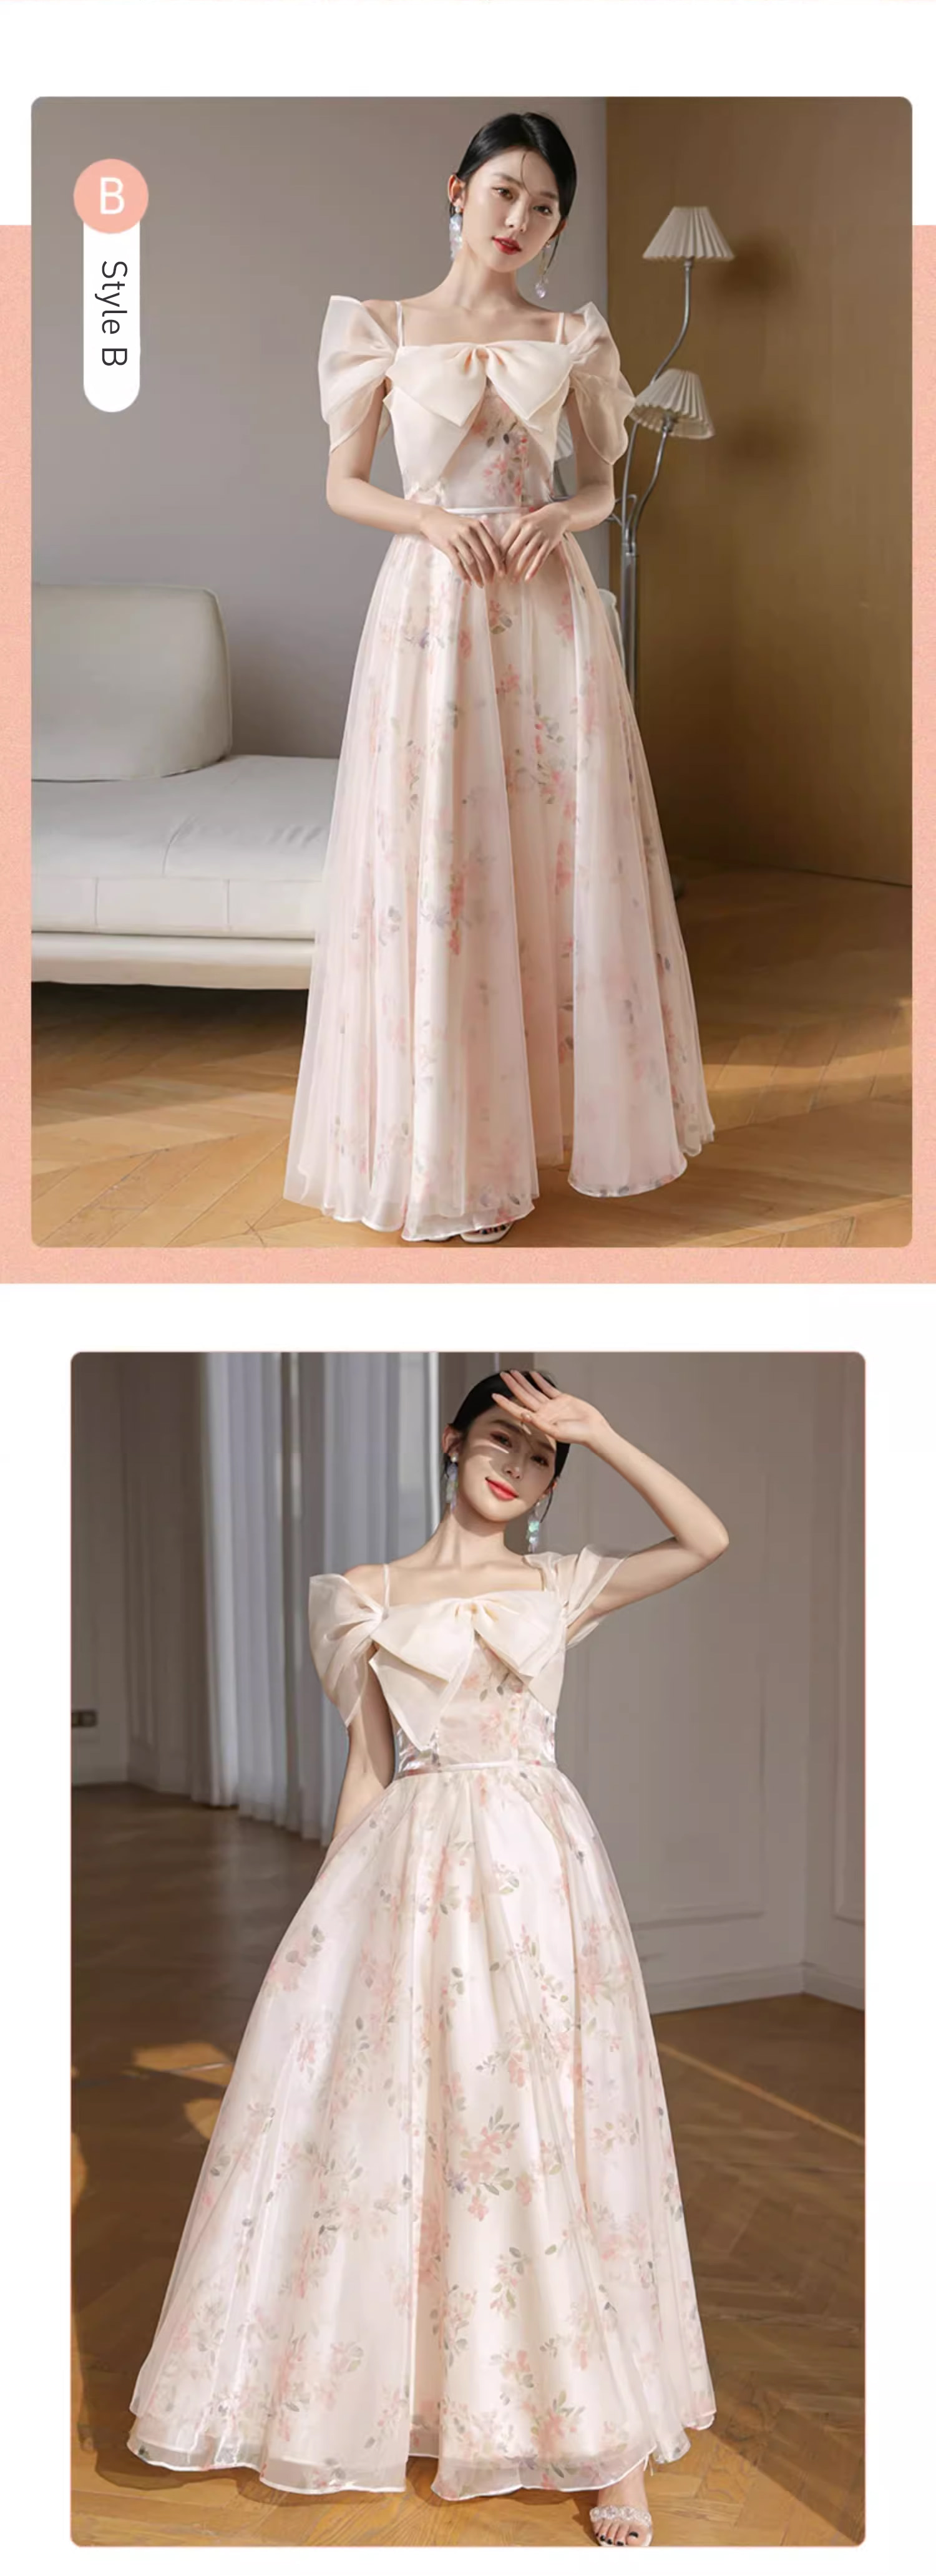 Sweet-A-line-Chiffon-Pink-Floral-Tulle-Maxi-Cocktail-Bridesmaid-Dress15